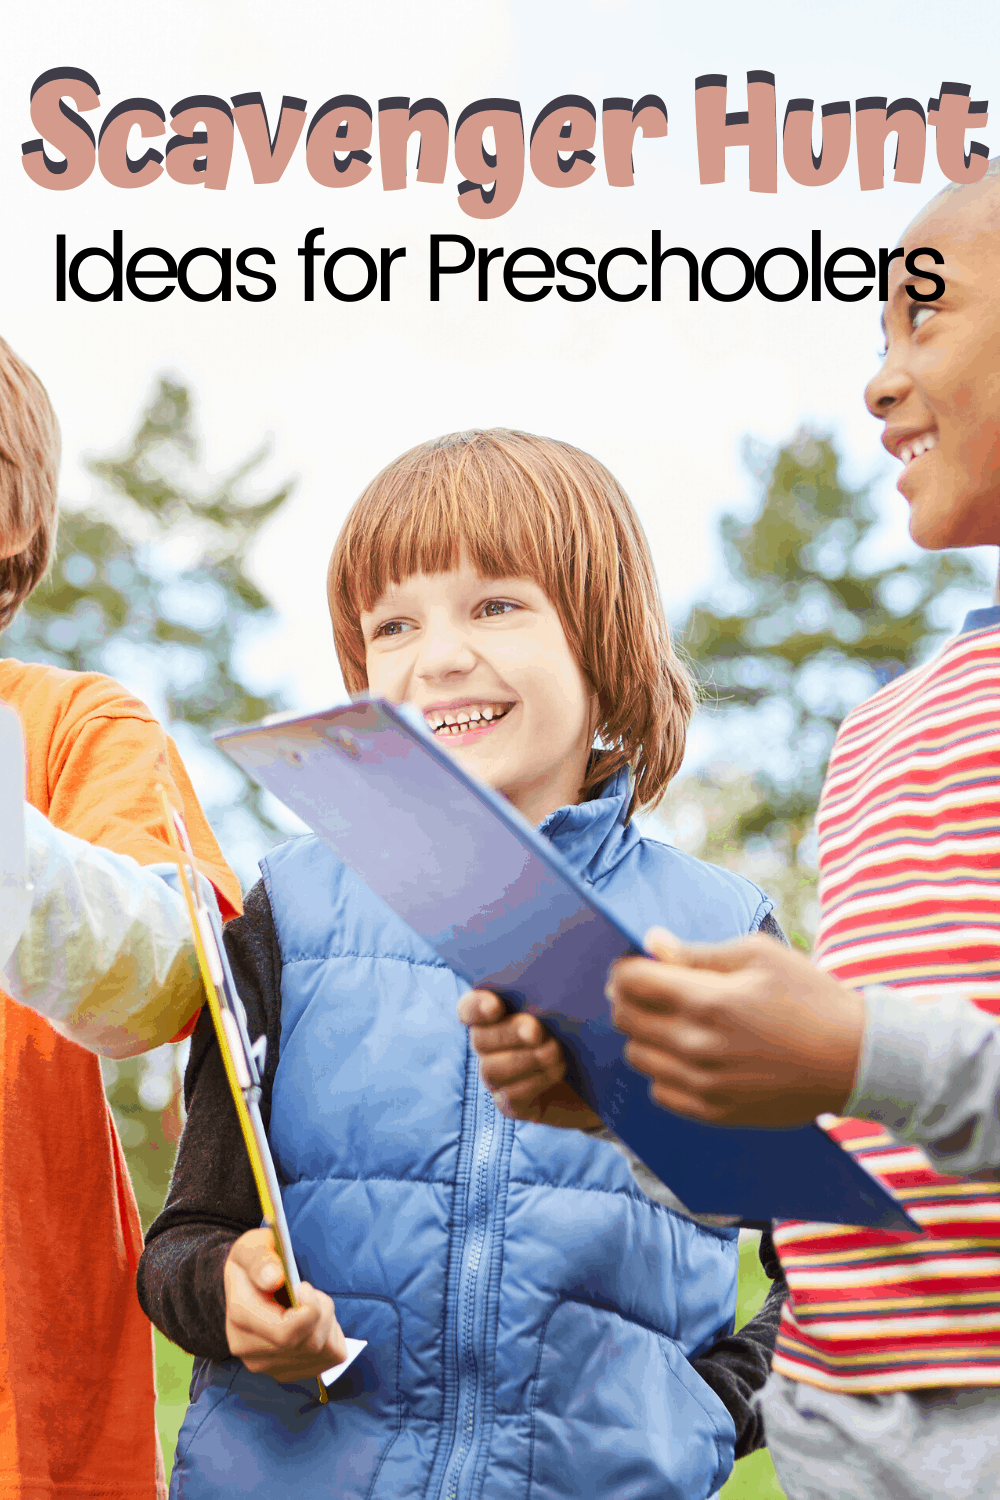 Whether you're looking for something fun to do at home or around the neighborhood, check out these fun suggestions for a preschool scavenger hunt!